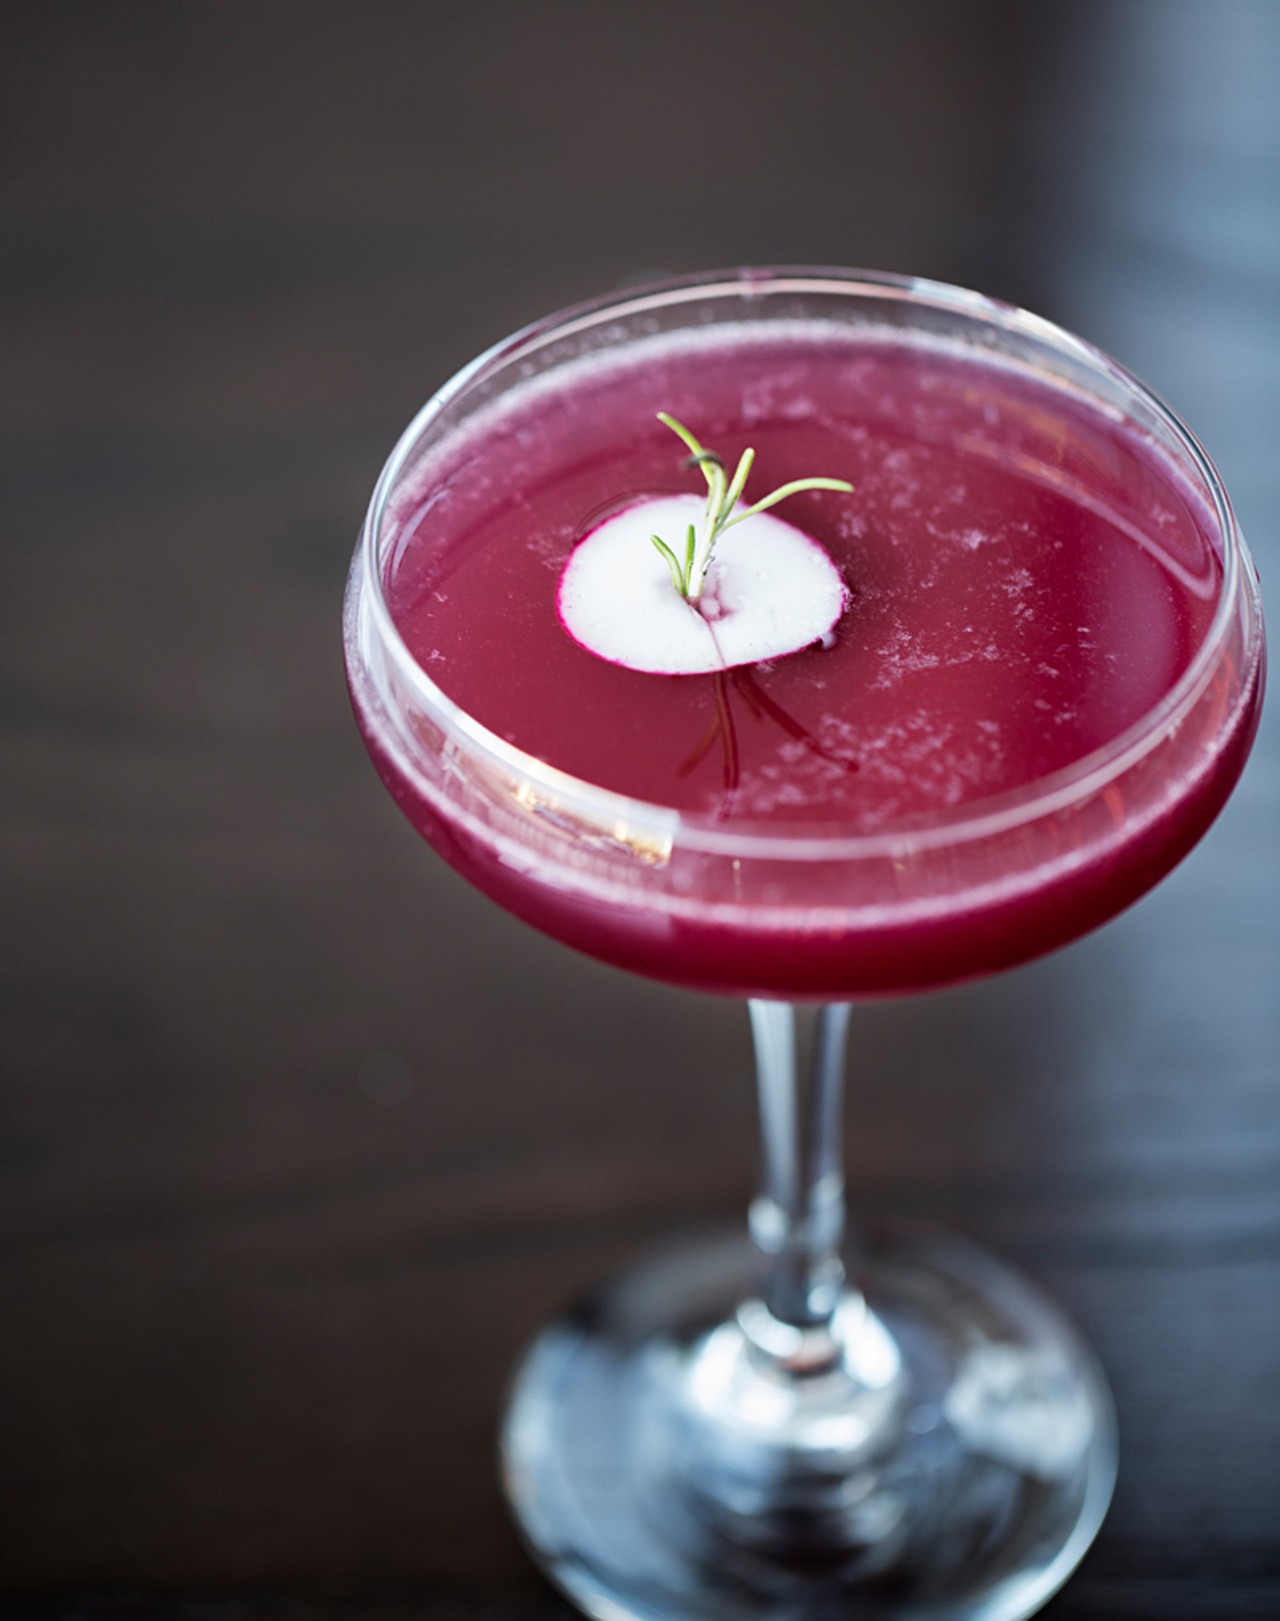 "The Roots" is made with beet syrup, ginger liqueur, aquavit, lemon & honey syrup.